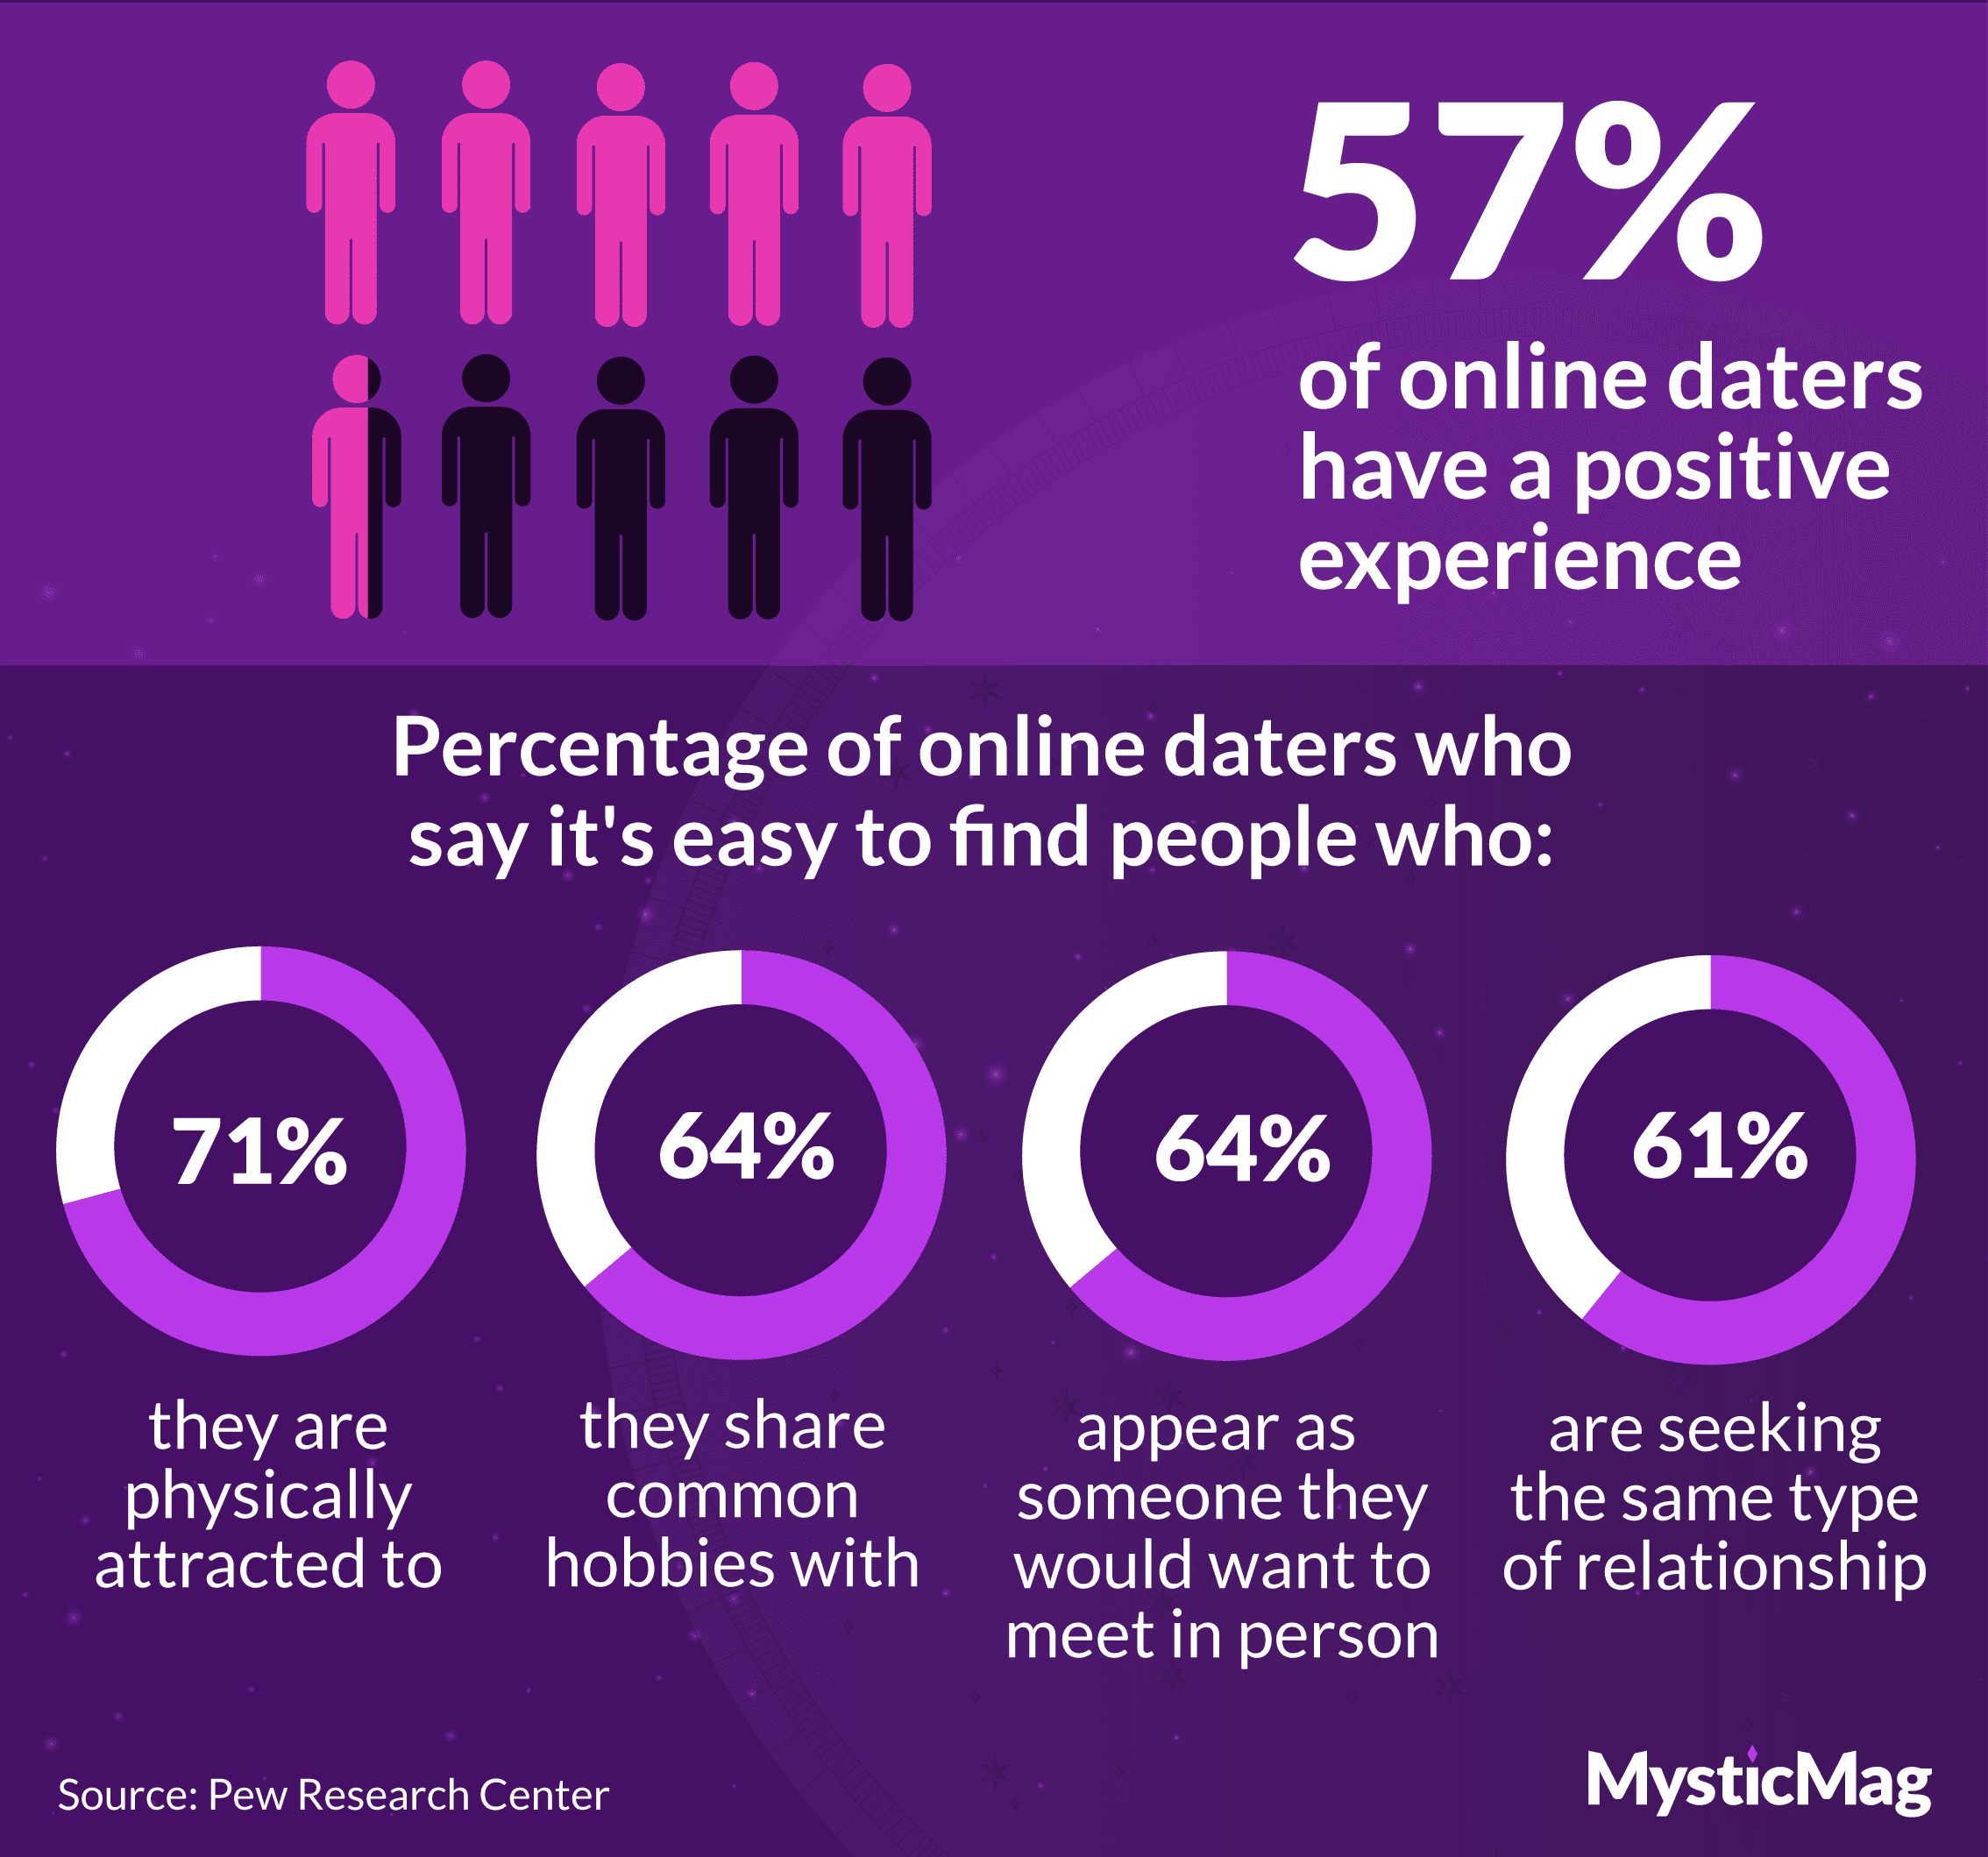 Statistics about the percentage of online daters who have a positive experience and the reasons why